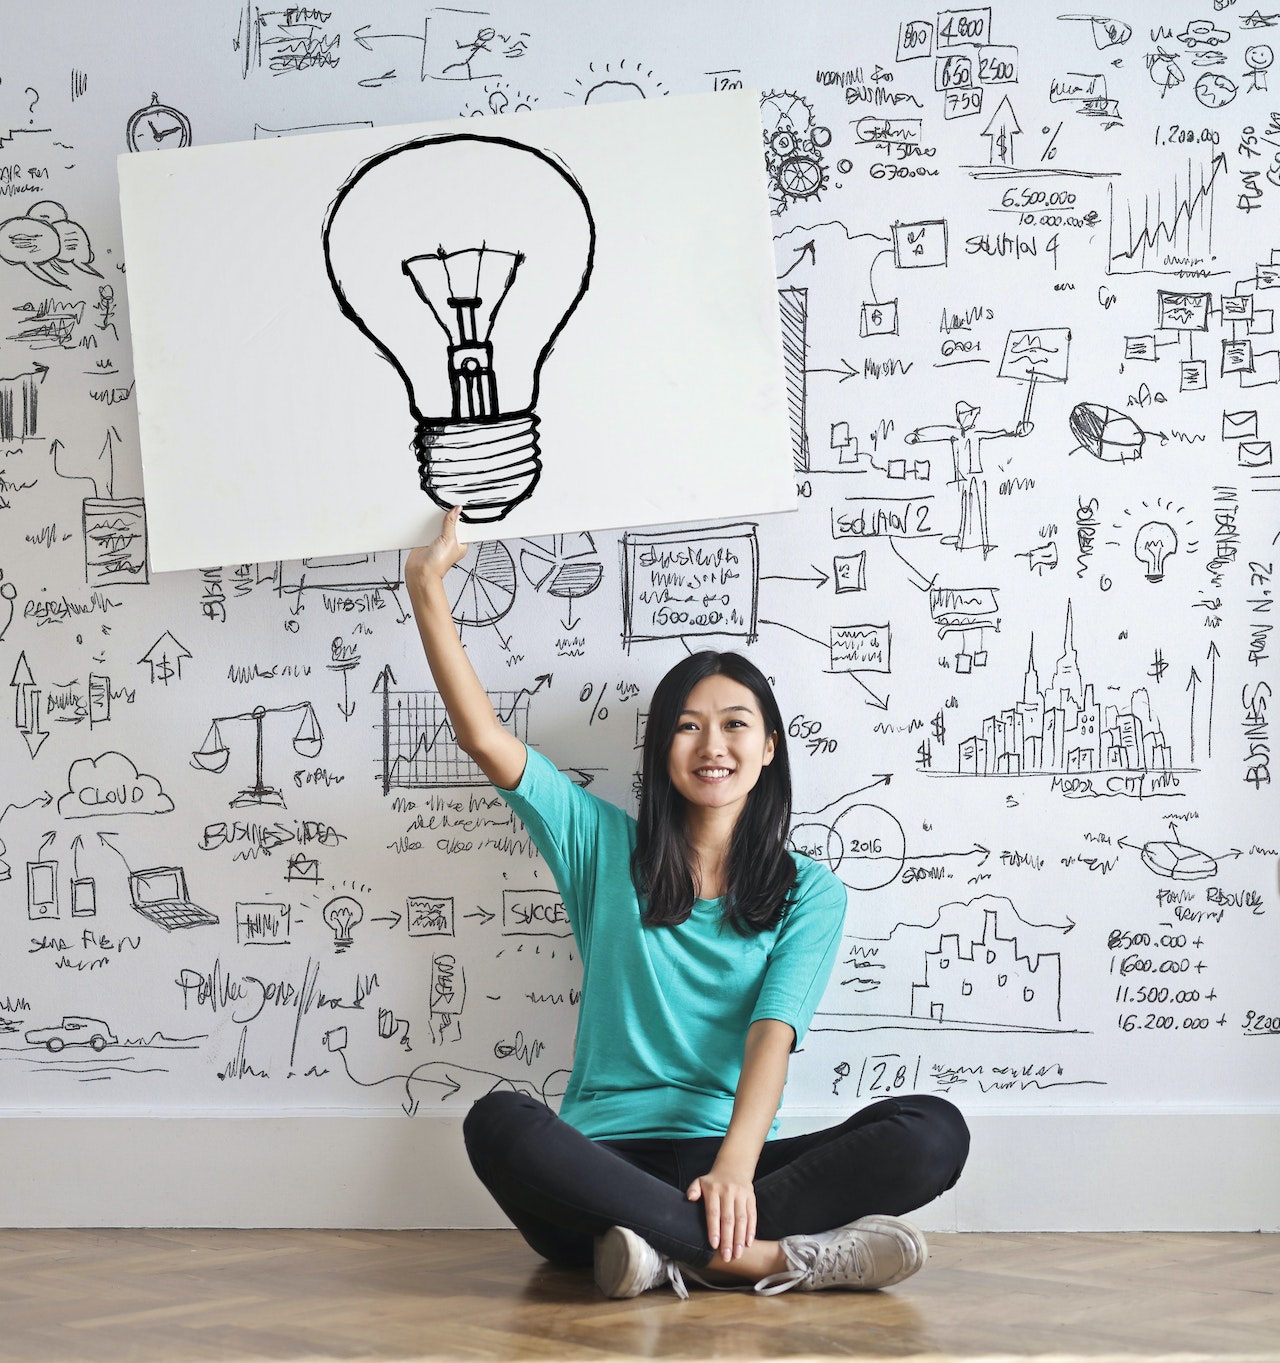 An innovator smiles, pointing to a lightbulb signifying her creativity in the workplace